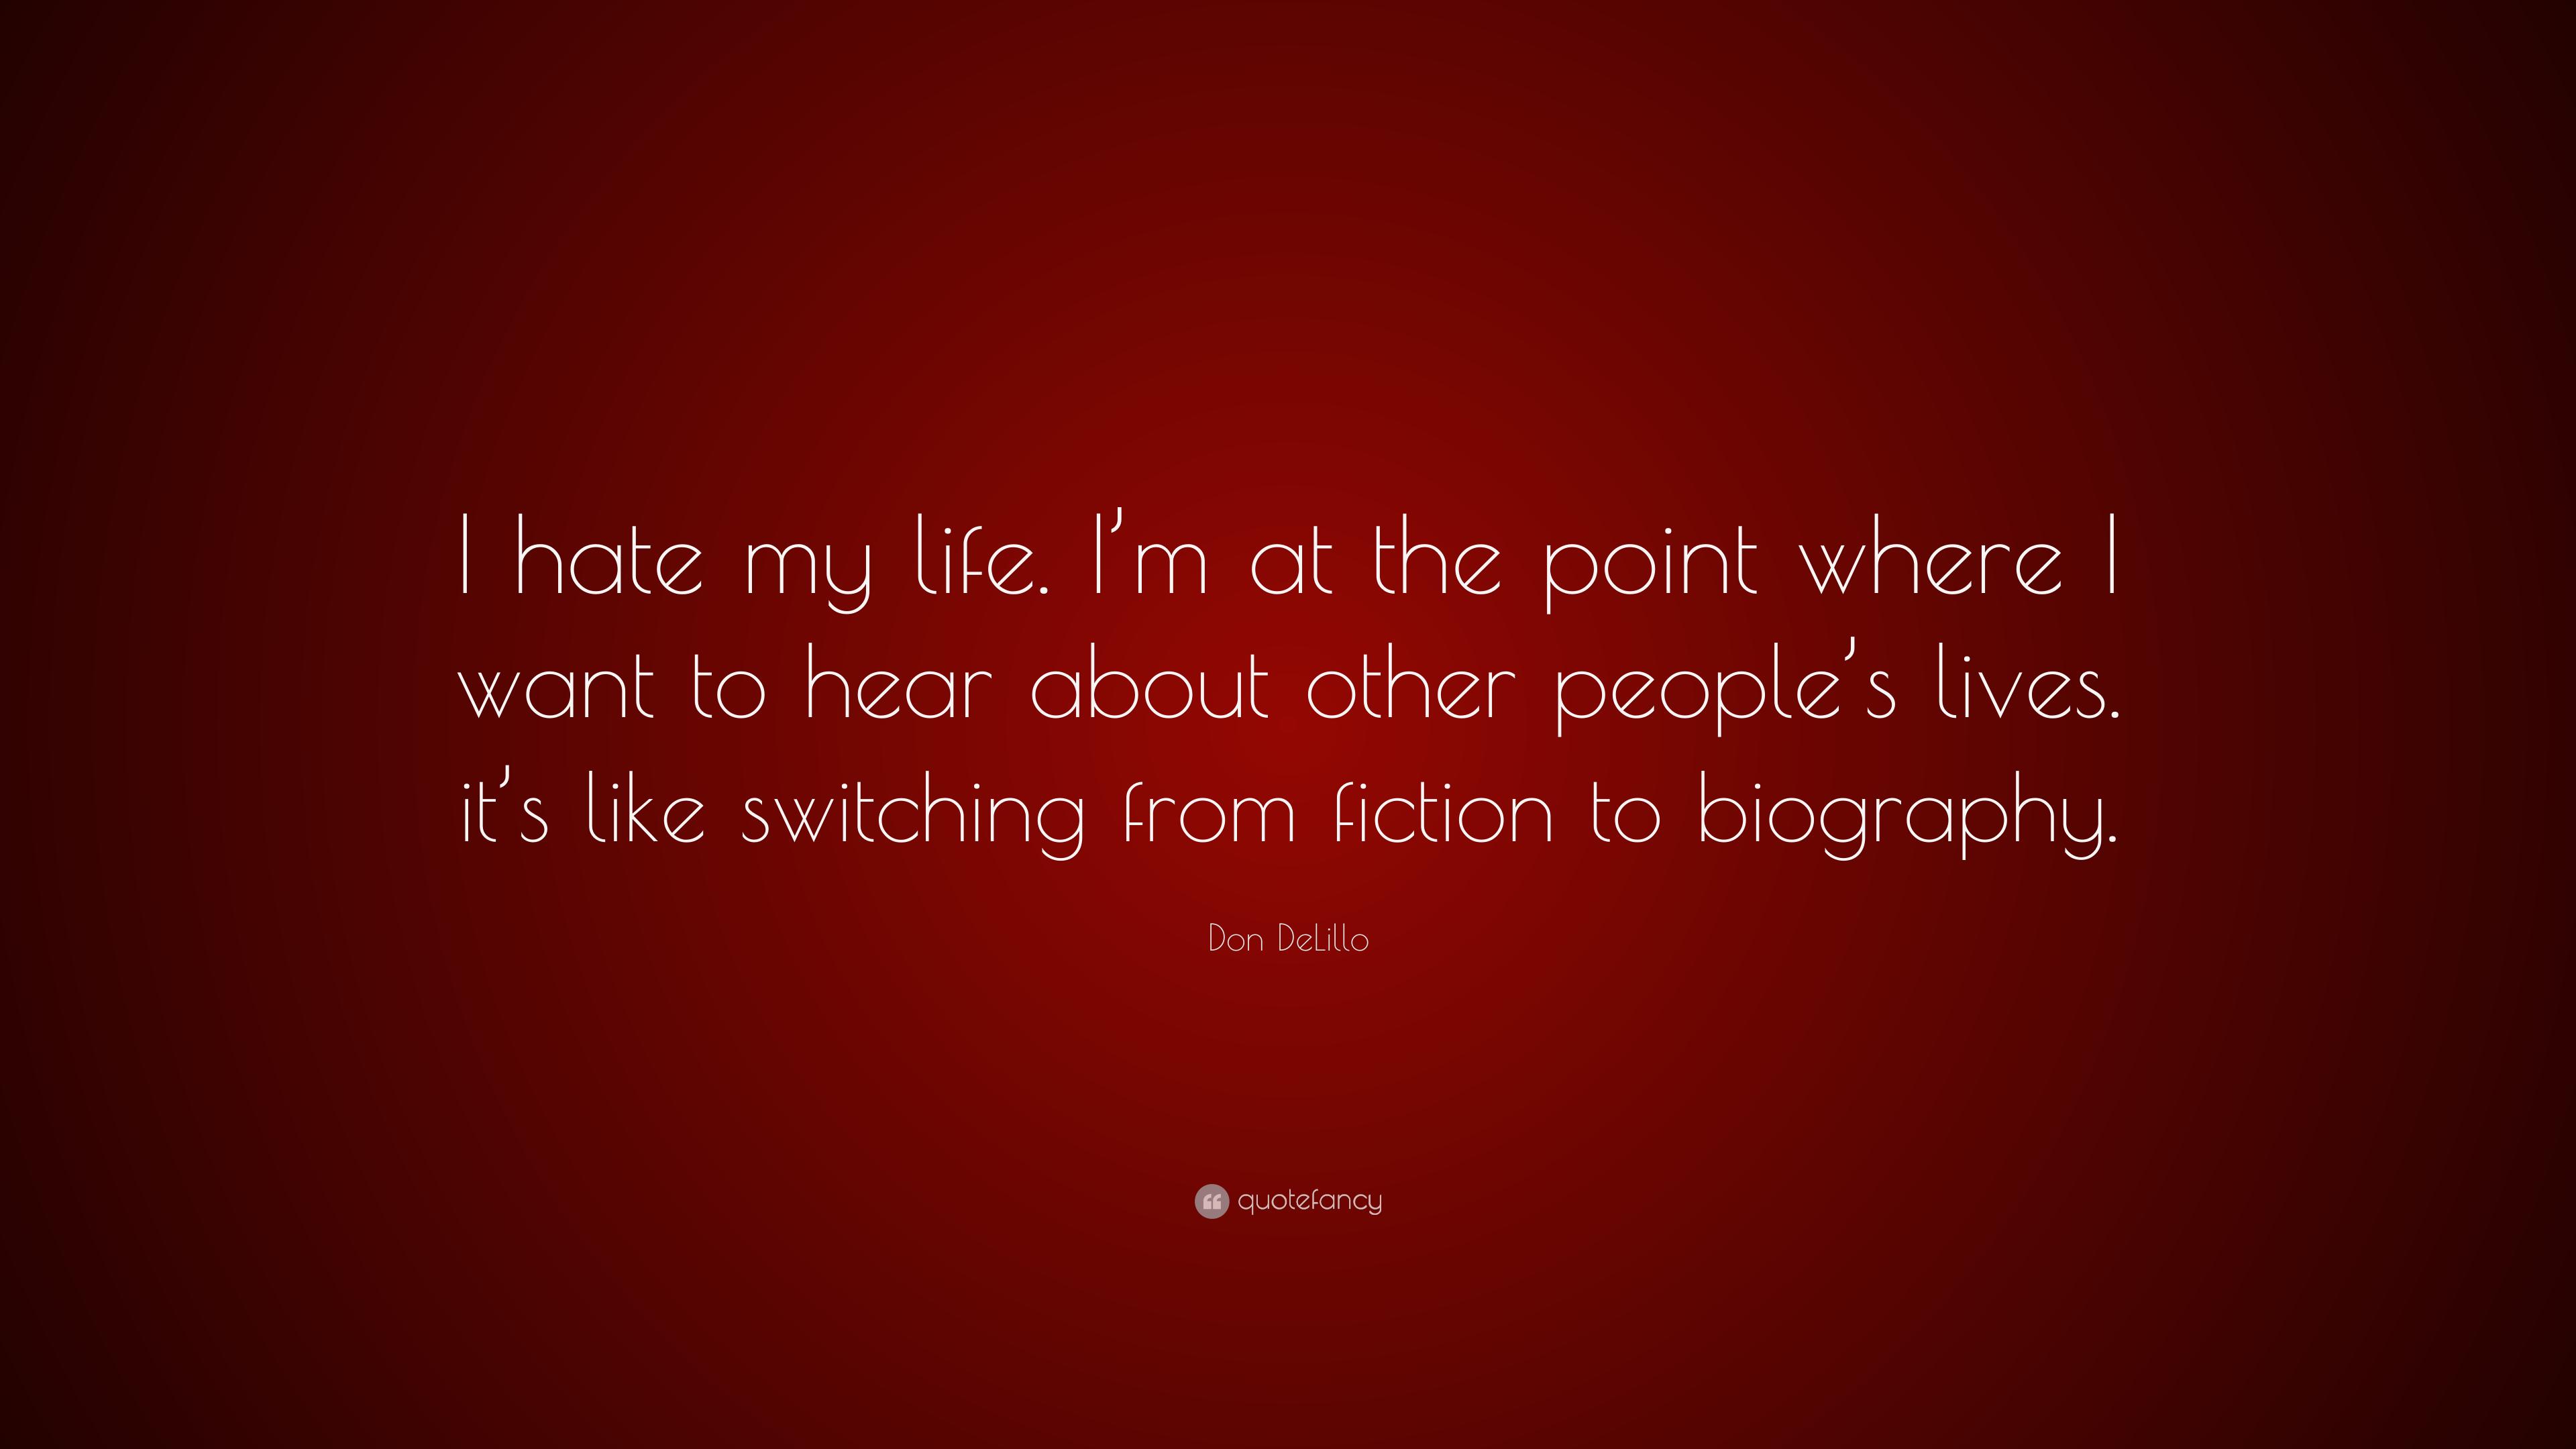 Don DeLillo Quote: “I hate my life. I'm at the point where I want